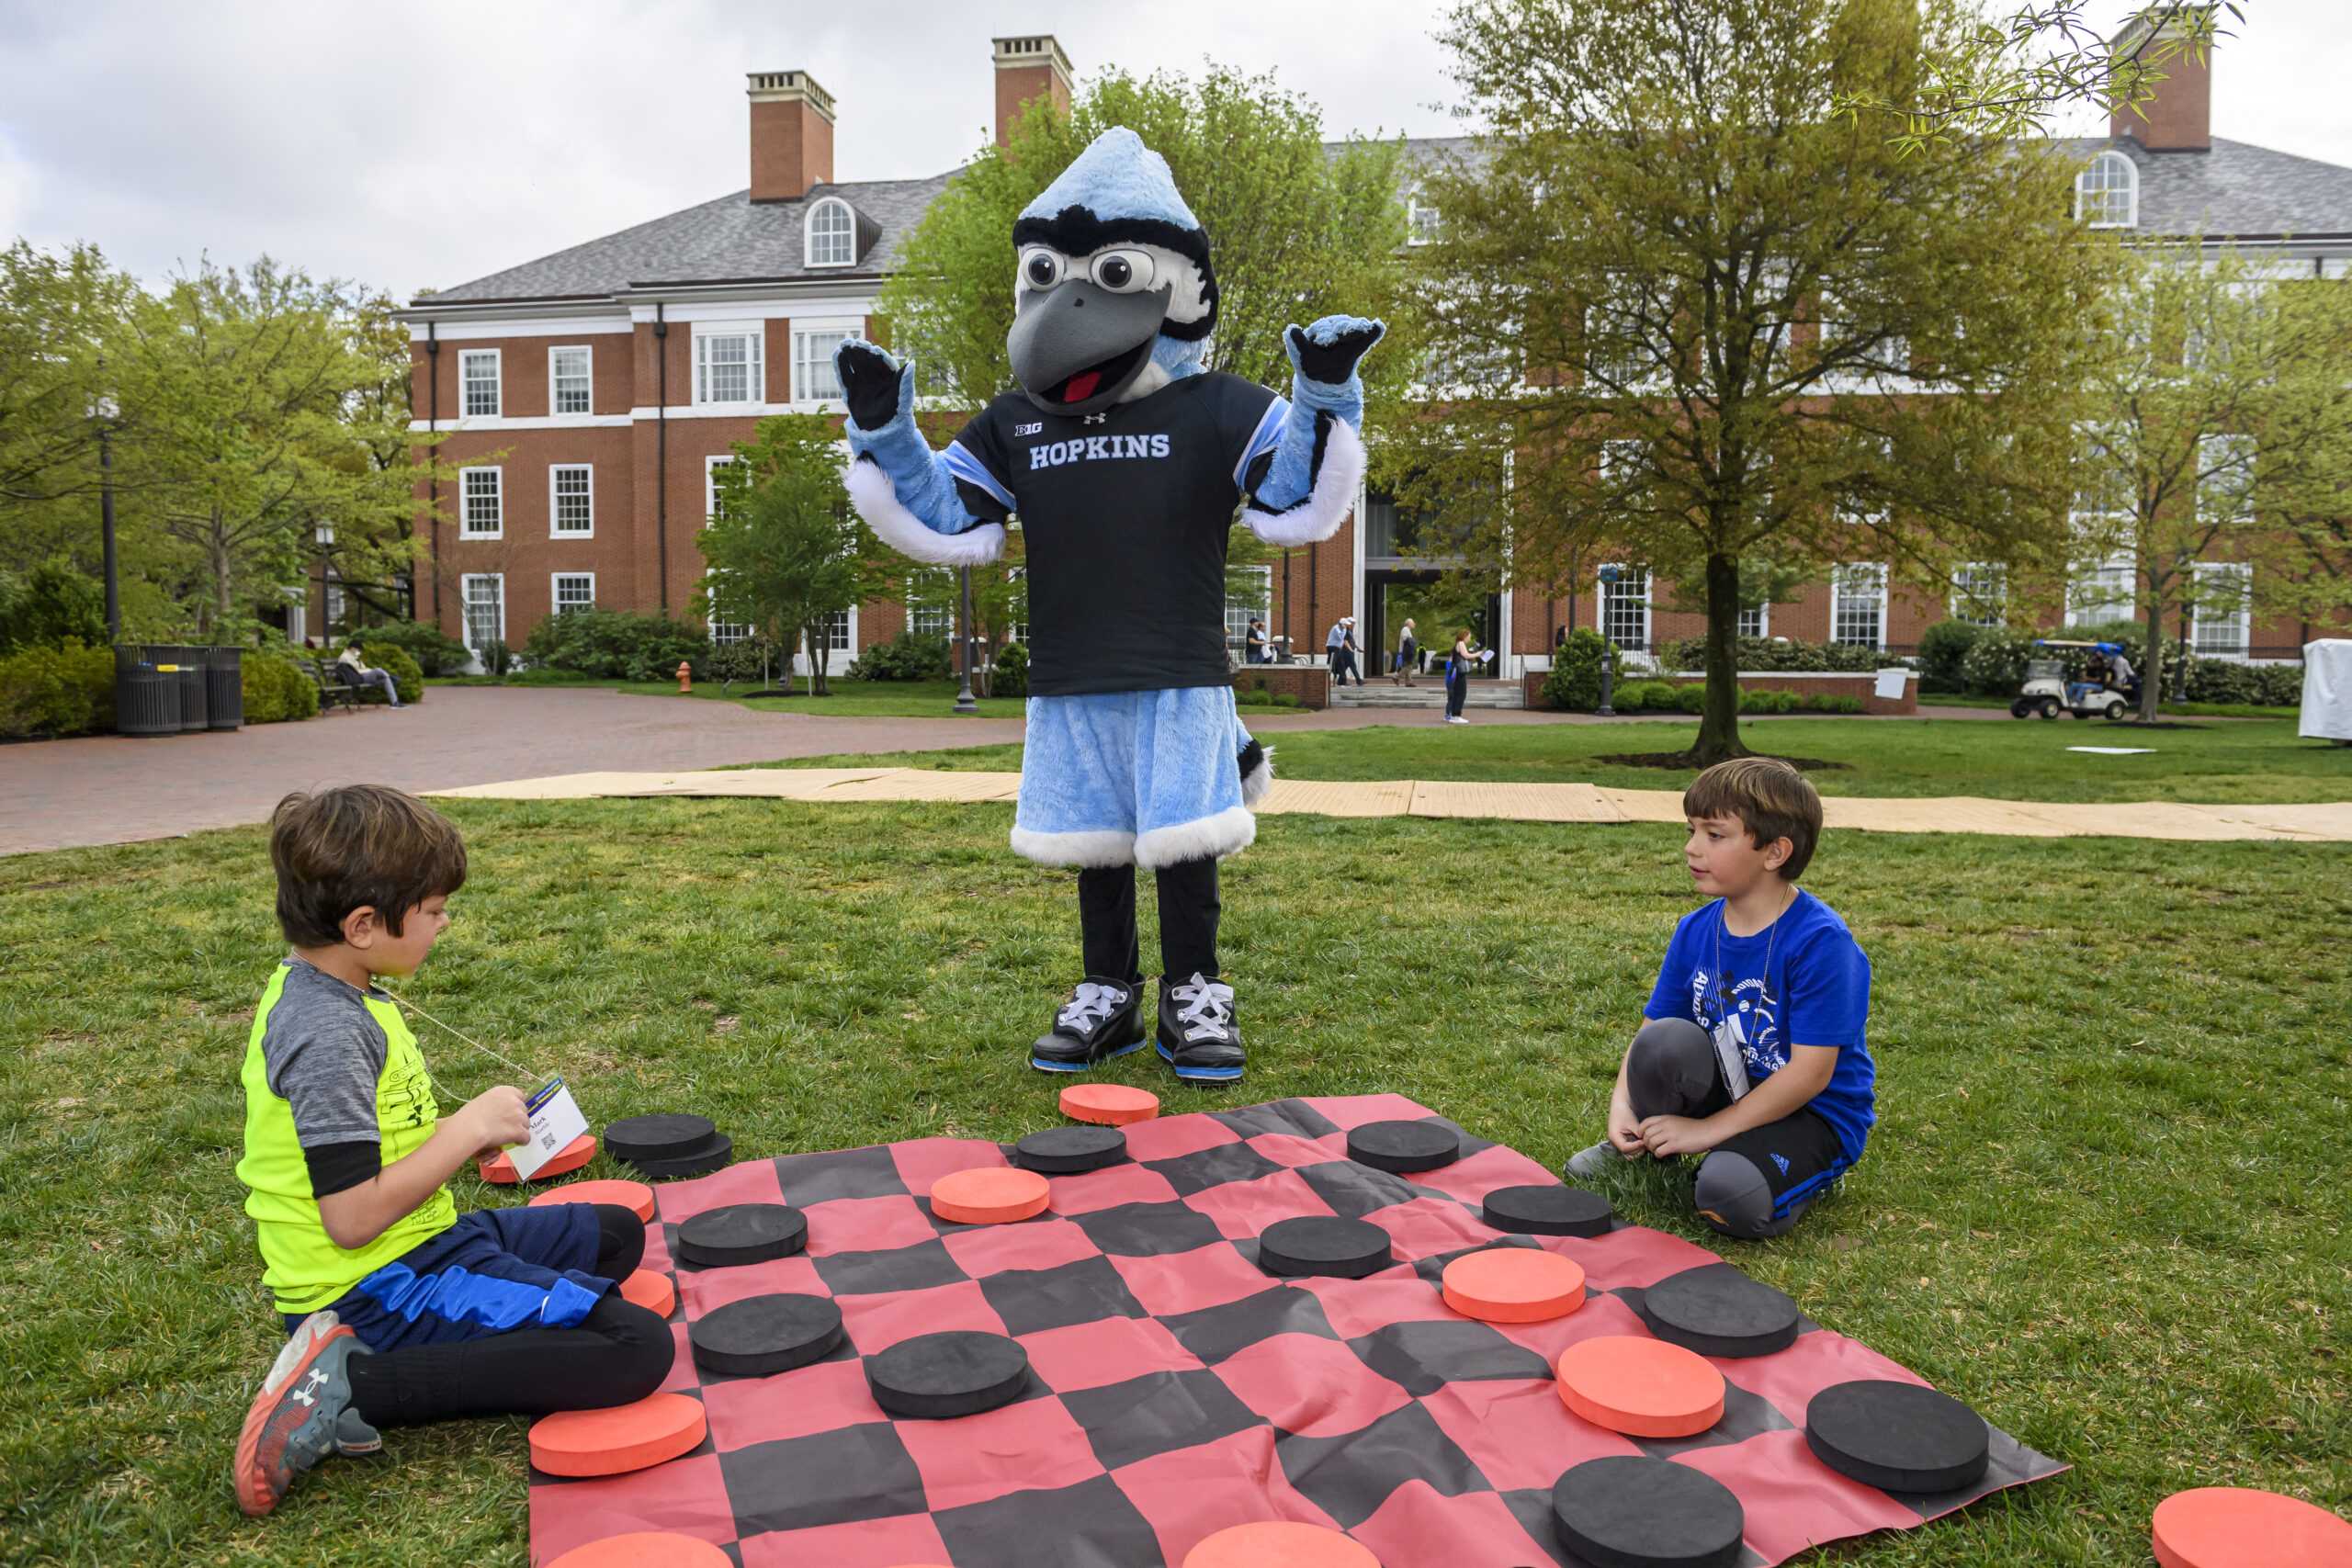 Blue Jay mascot interacting with children playing giant checkers lawn game